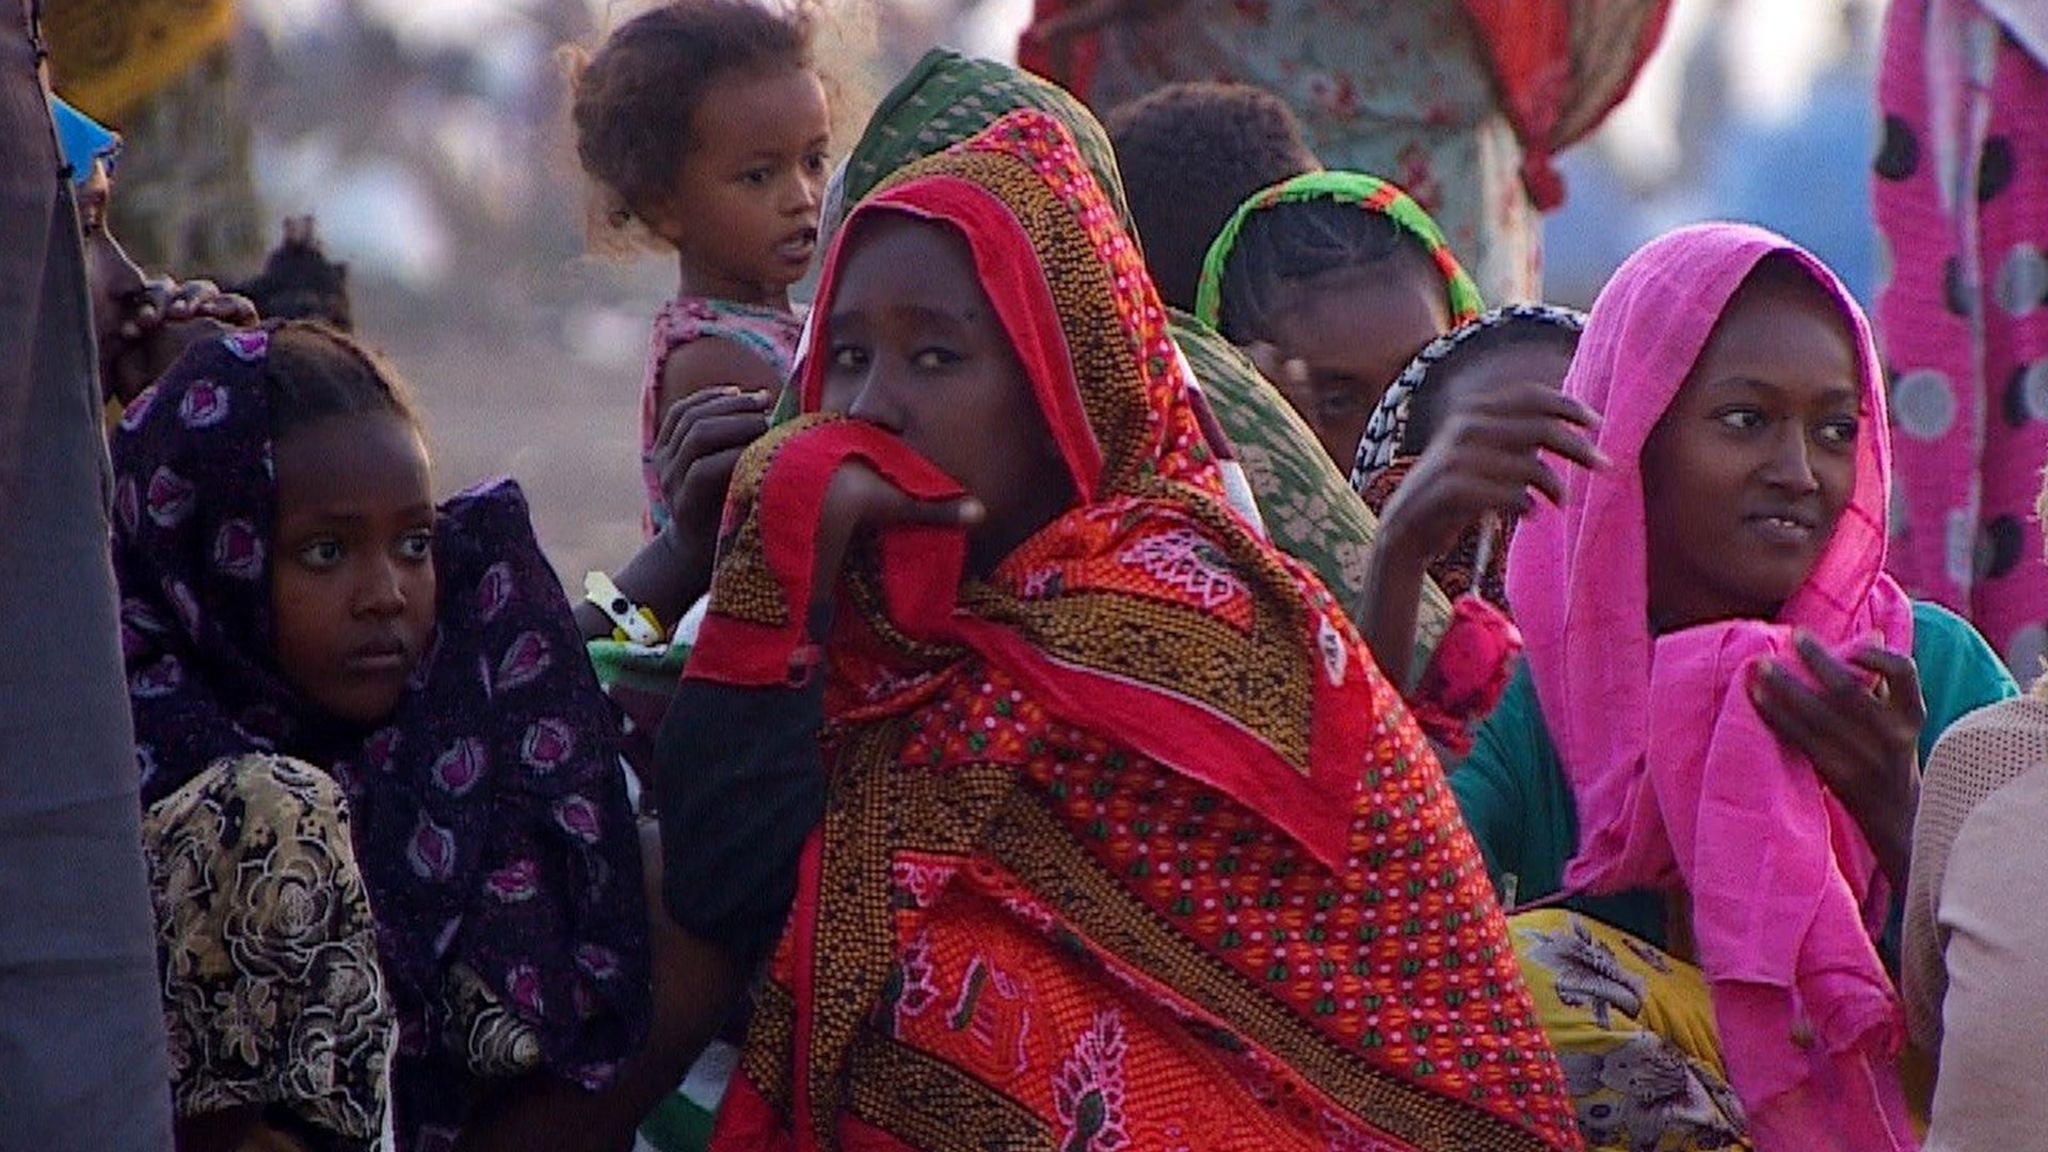 Refugees who have fled Ethiopia's northern Tigray region amid fierce fighting